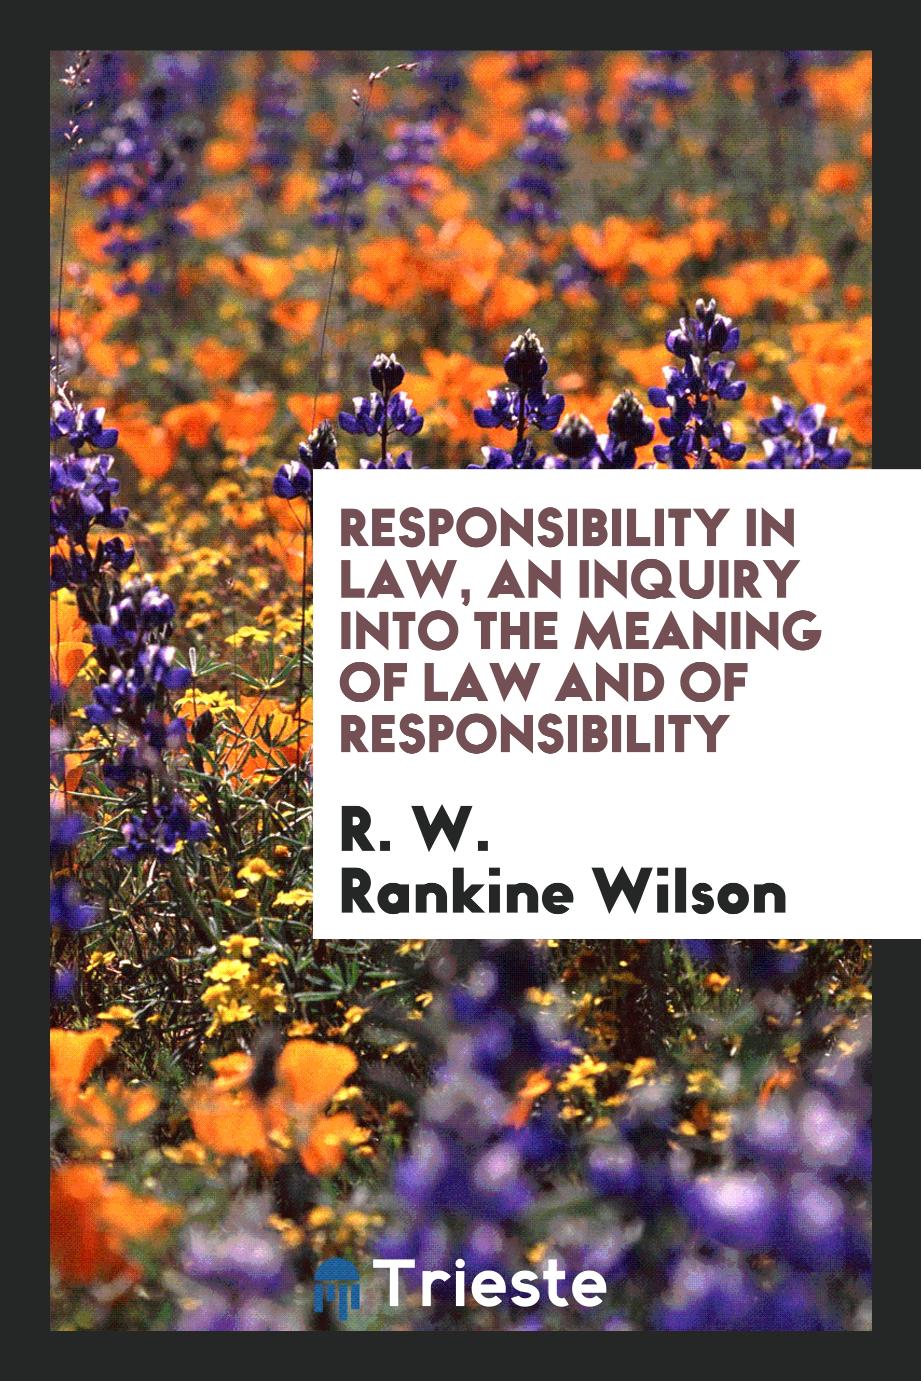 Responsibility in law, an inquiry into the meaning of law and of responsibility